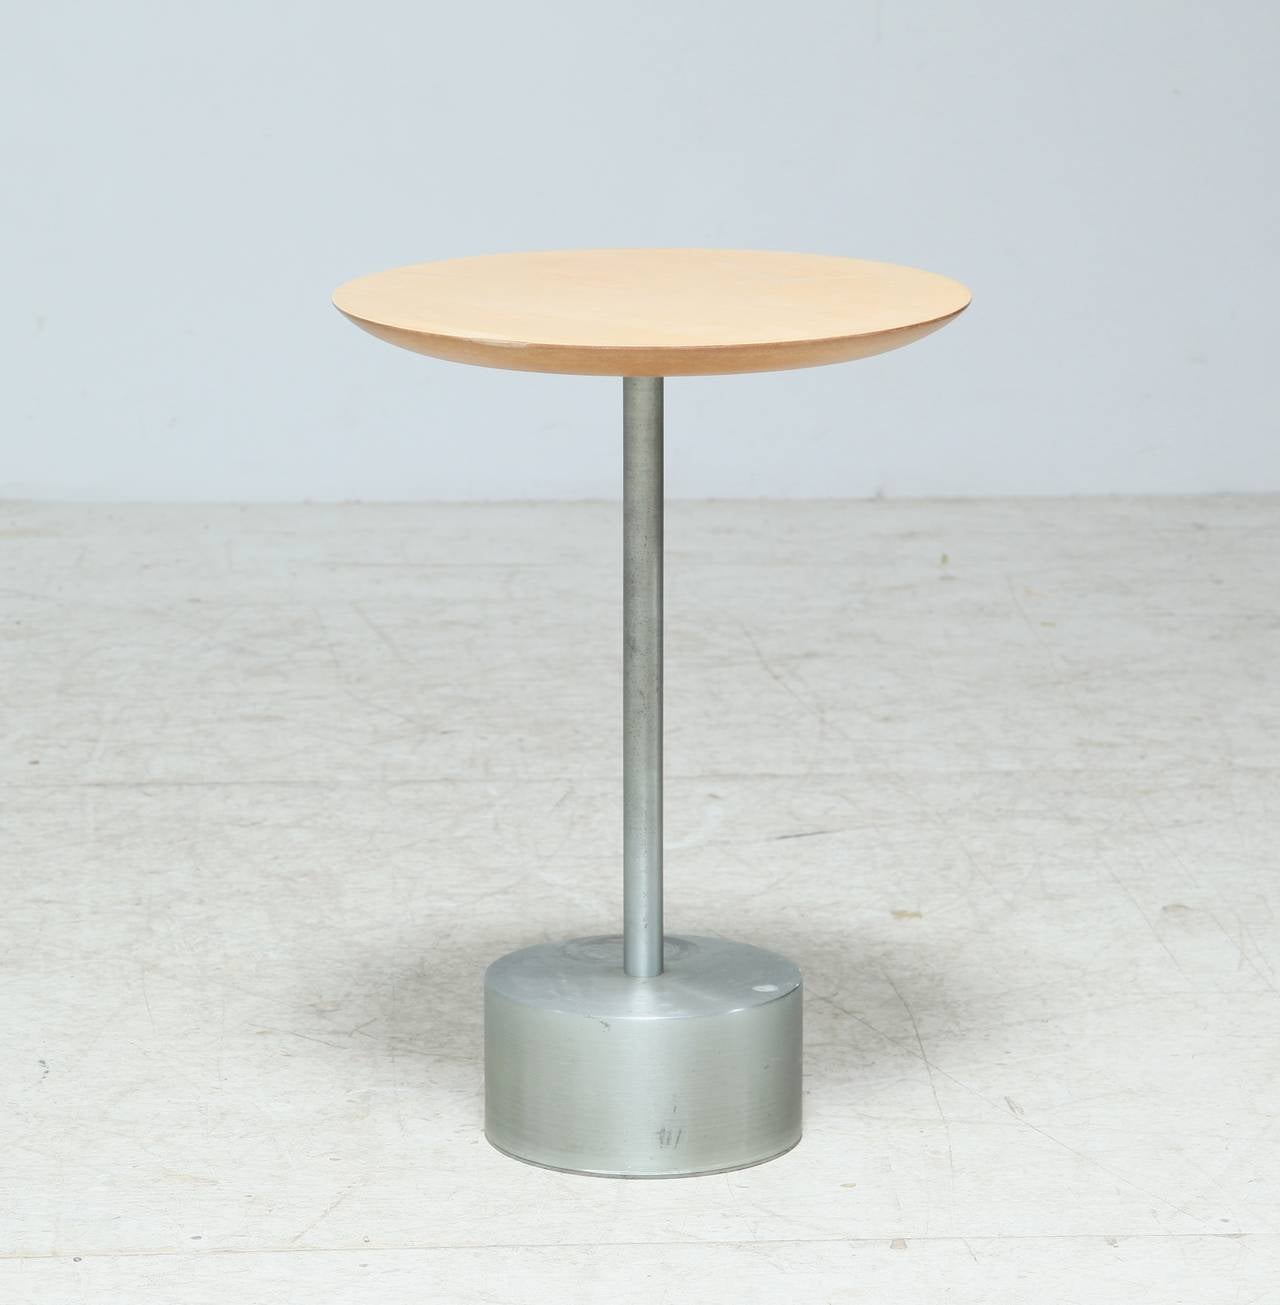 A round birch side table on an aluminum base.